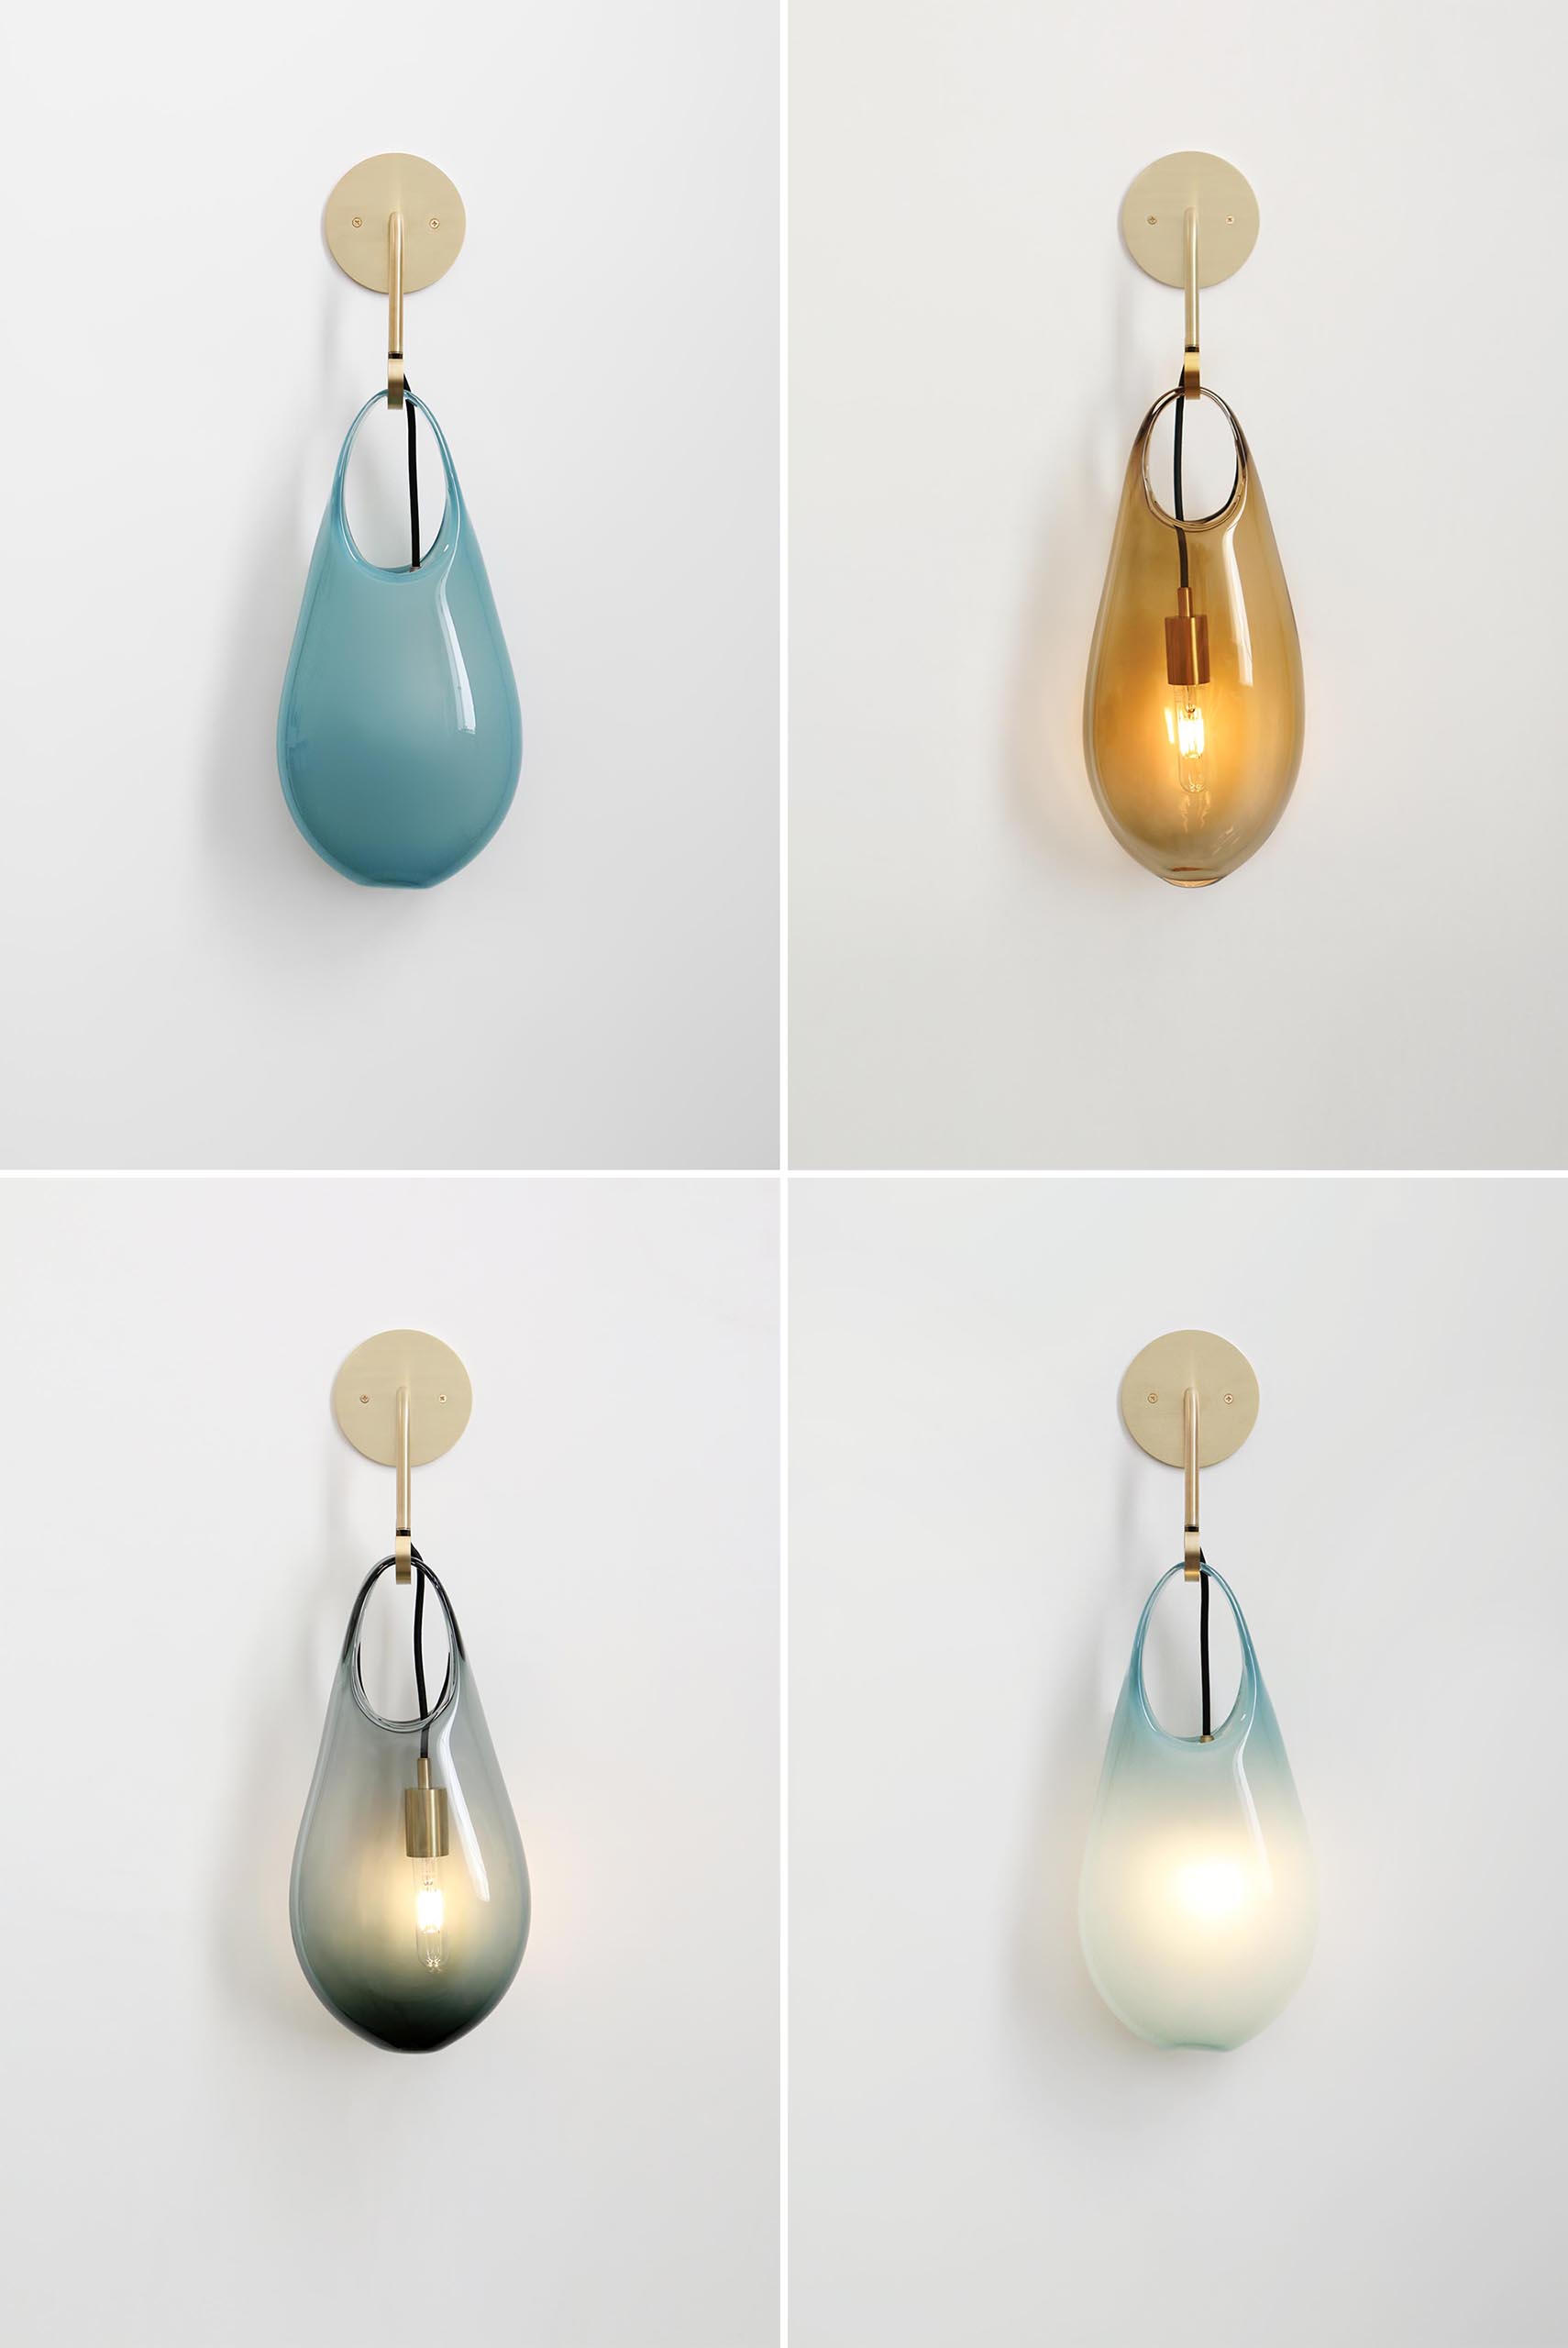 The Hold pendant lights and sconces, are modern handblown glass lights that look like they're hanging from hooks.